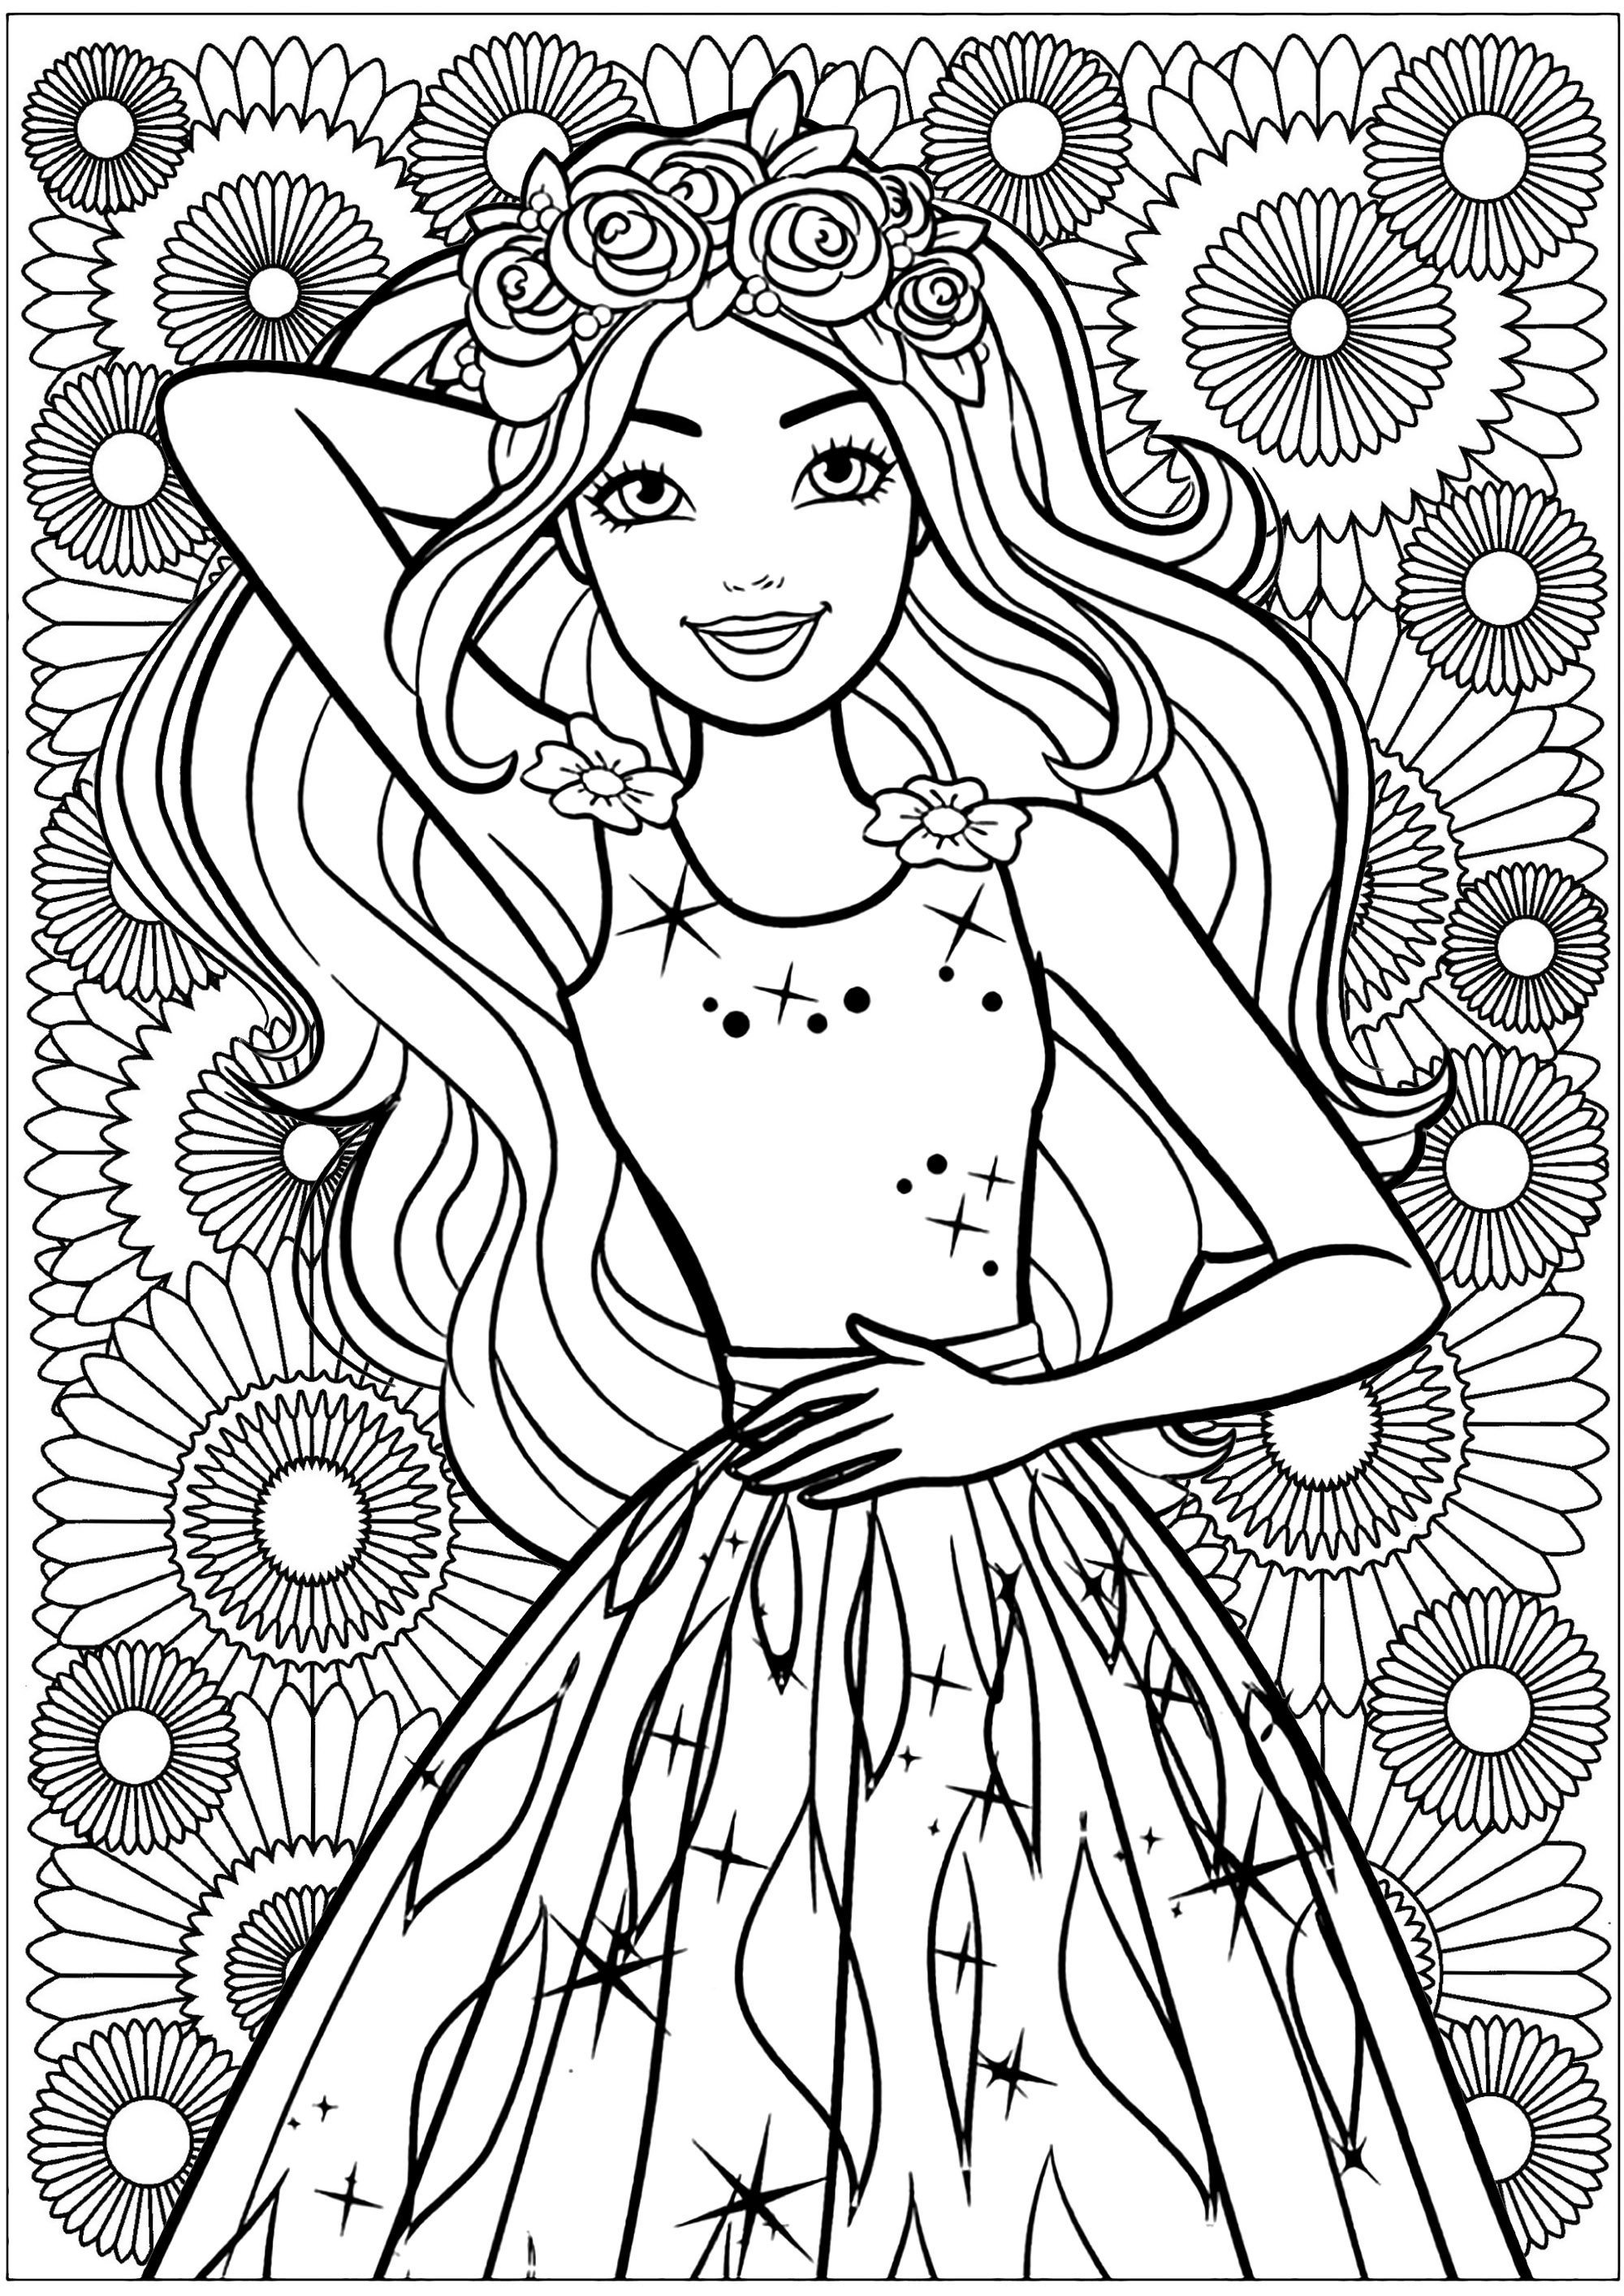 Pretty Barbie with floral background. Beautiful coloring with a Barbie-inspired female character in the foreground, and a background of beautiful geometric flowers.